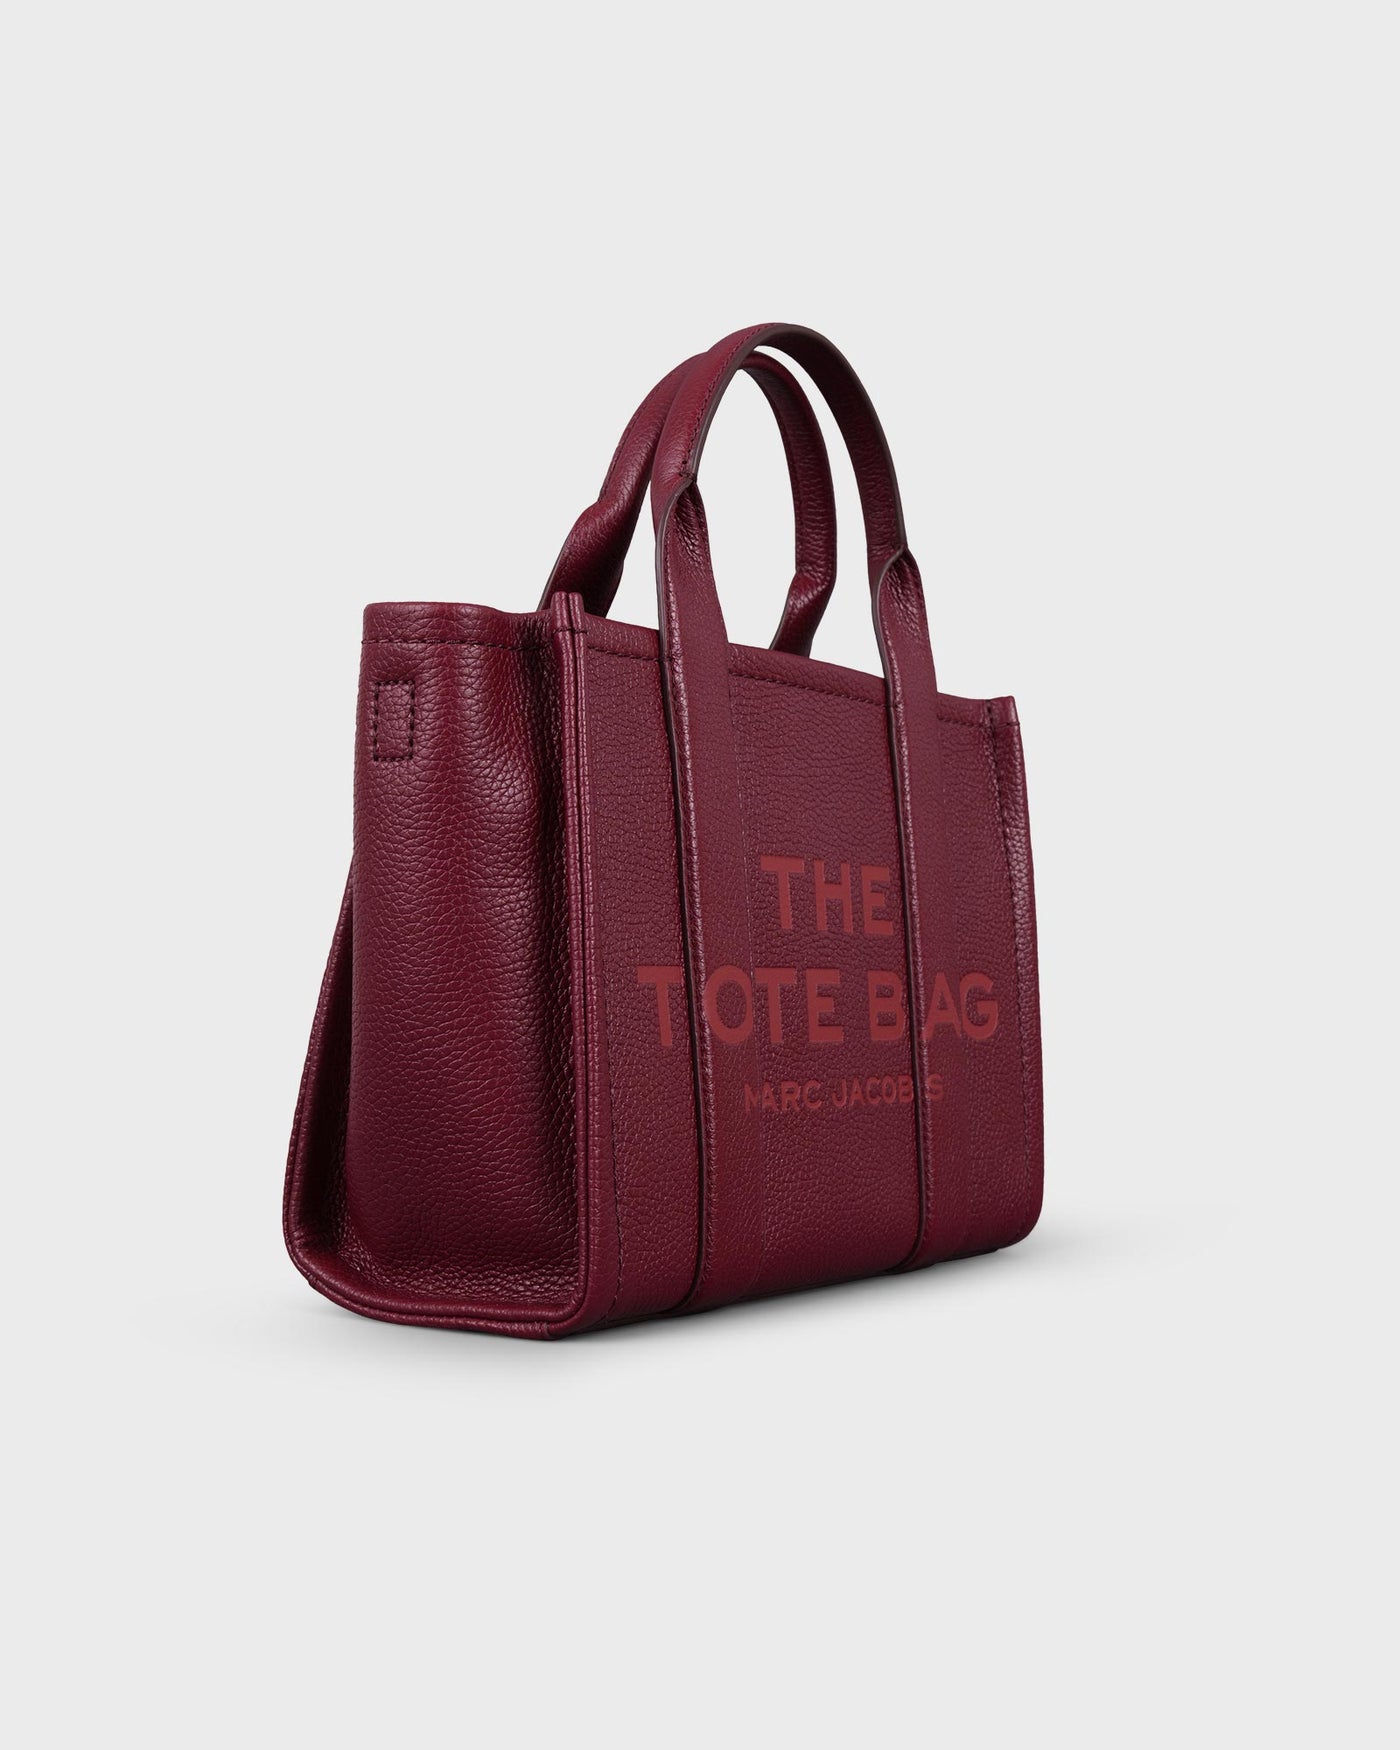 Marc Jacobs Tasche The Leather Small Tote Bag Cherry myMEID